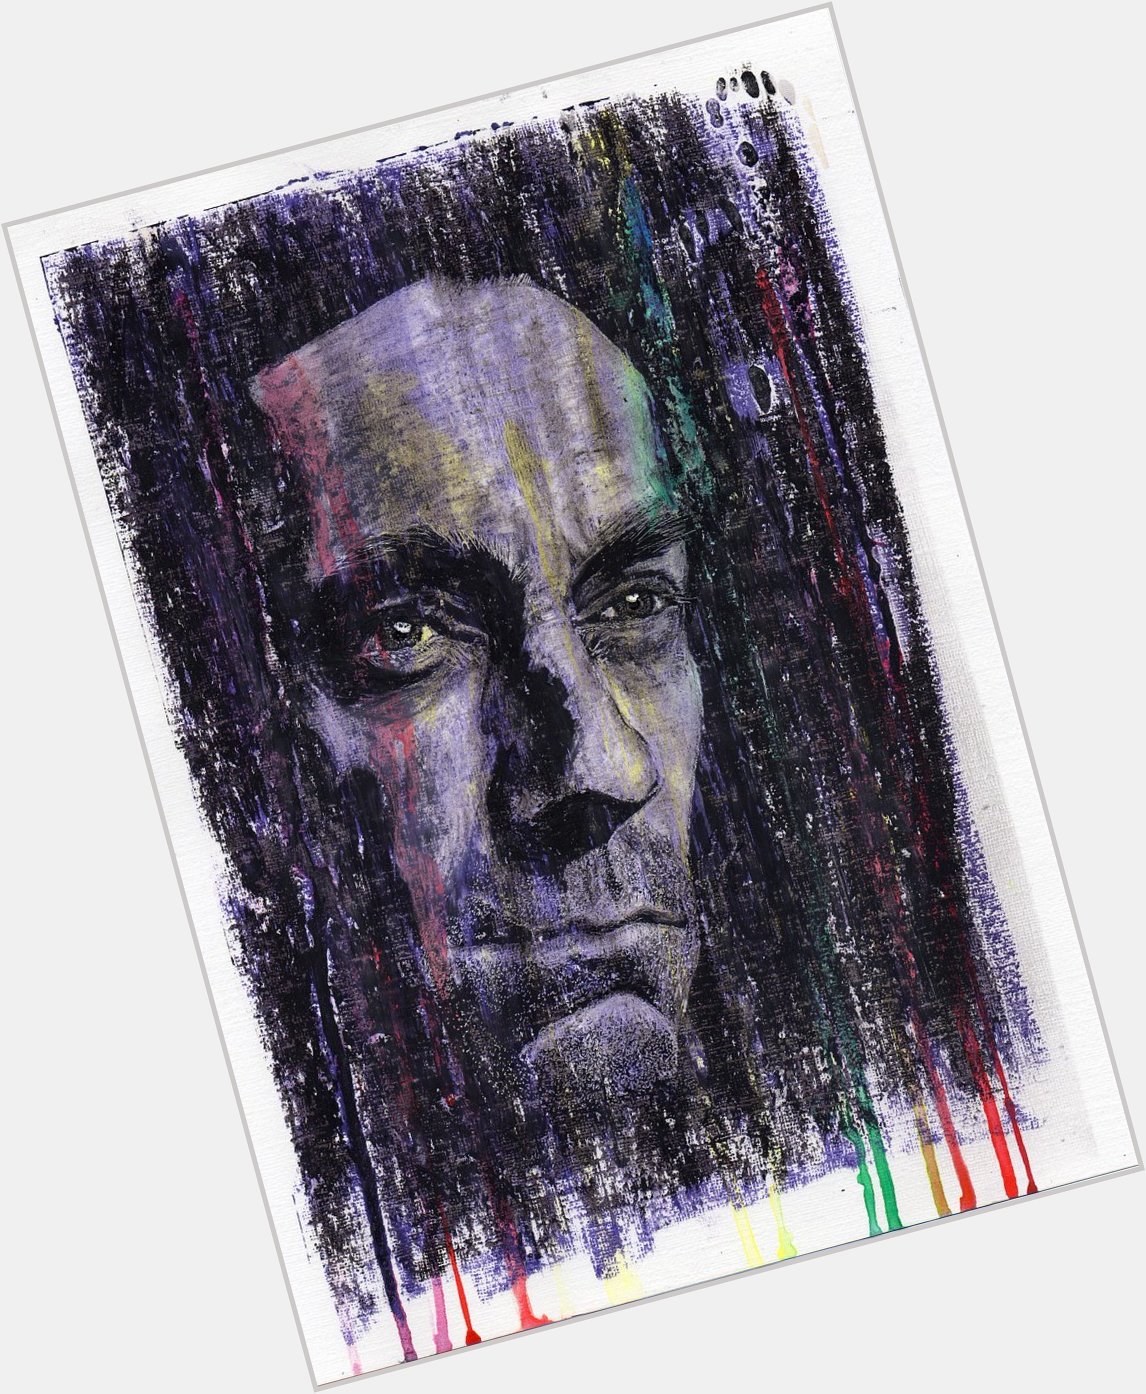 Happy birthday Jon Hamm! This picture: oil and ink on acrylic paper, 21cm x 30cm. 